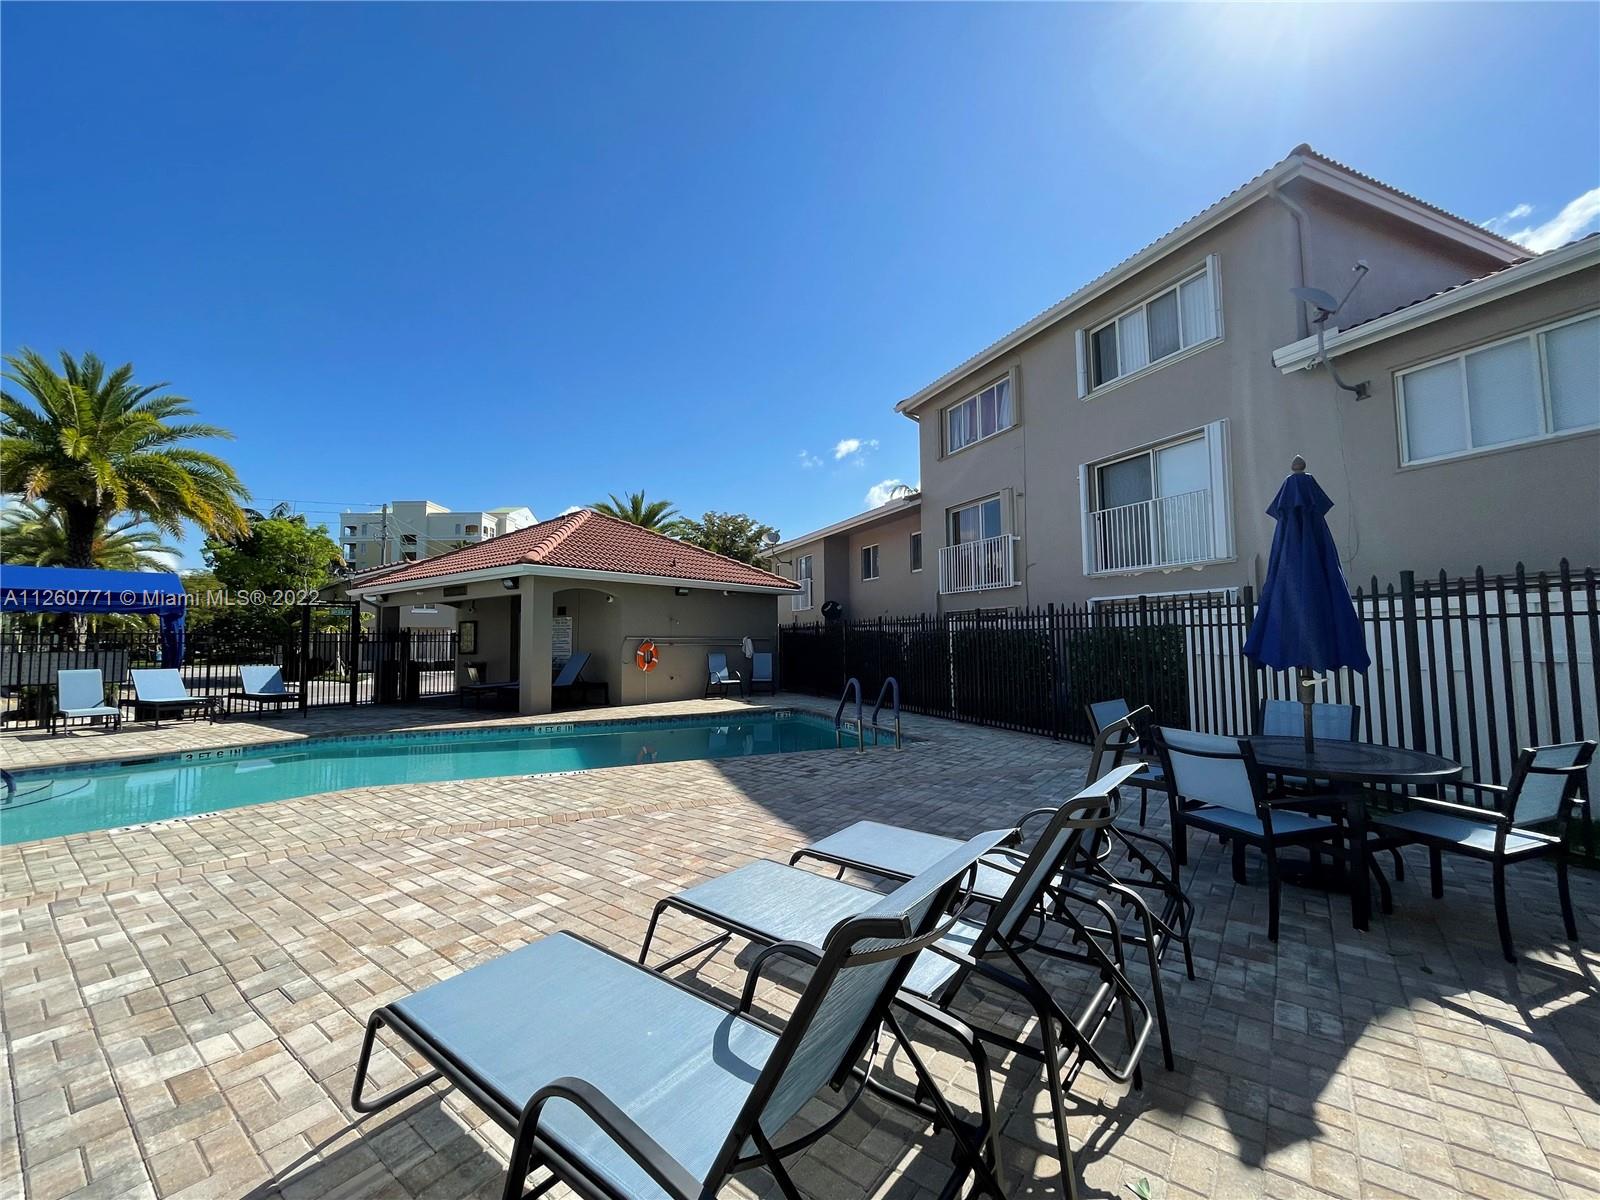 3-STORY, 3 BEDROOMS, AND 3 BATHROOMS UNIT IN RIVIERA AT BONAVENTURE. ONE CAR GARAGE. TILE THROUGHOUT. PRIVATE FENCED PATIO. WESTON LIVING IN THE BEST LOCATION! MINUTES AWAY FROM SAWGRASS MILLS MALL, NEARBY BB&T CENTER, AND HIGHWAYS. “OK” TO RENT. NO ASSOCIATION APPROVAL IS NEEDED. SELLER WILL GIVE A CREDIT OF $10,000.00 FOR IMPROVEMENTS